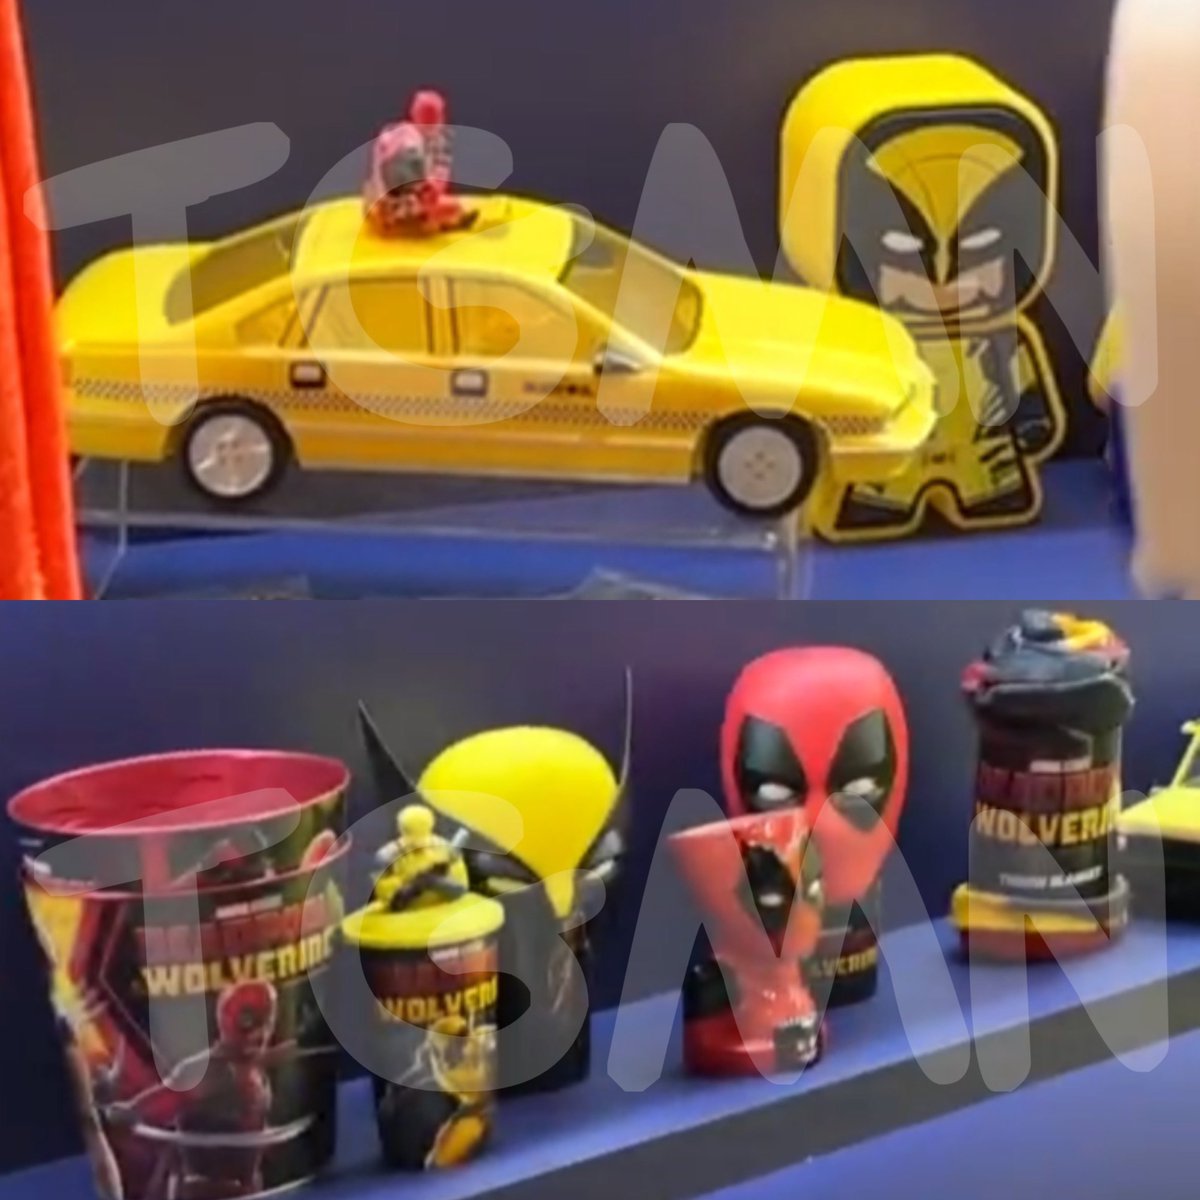 First look at some of the theater collectible items for 'DEADPOOL & WOLVERINE.' (via @GarfieldMovNews)